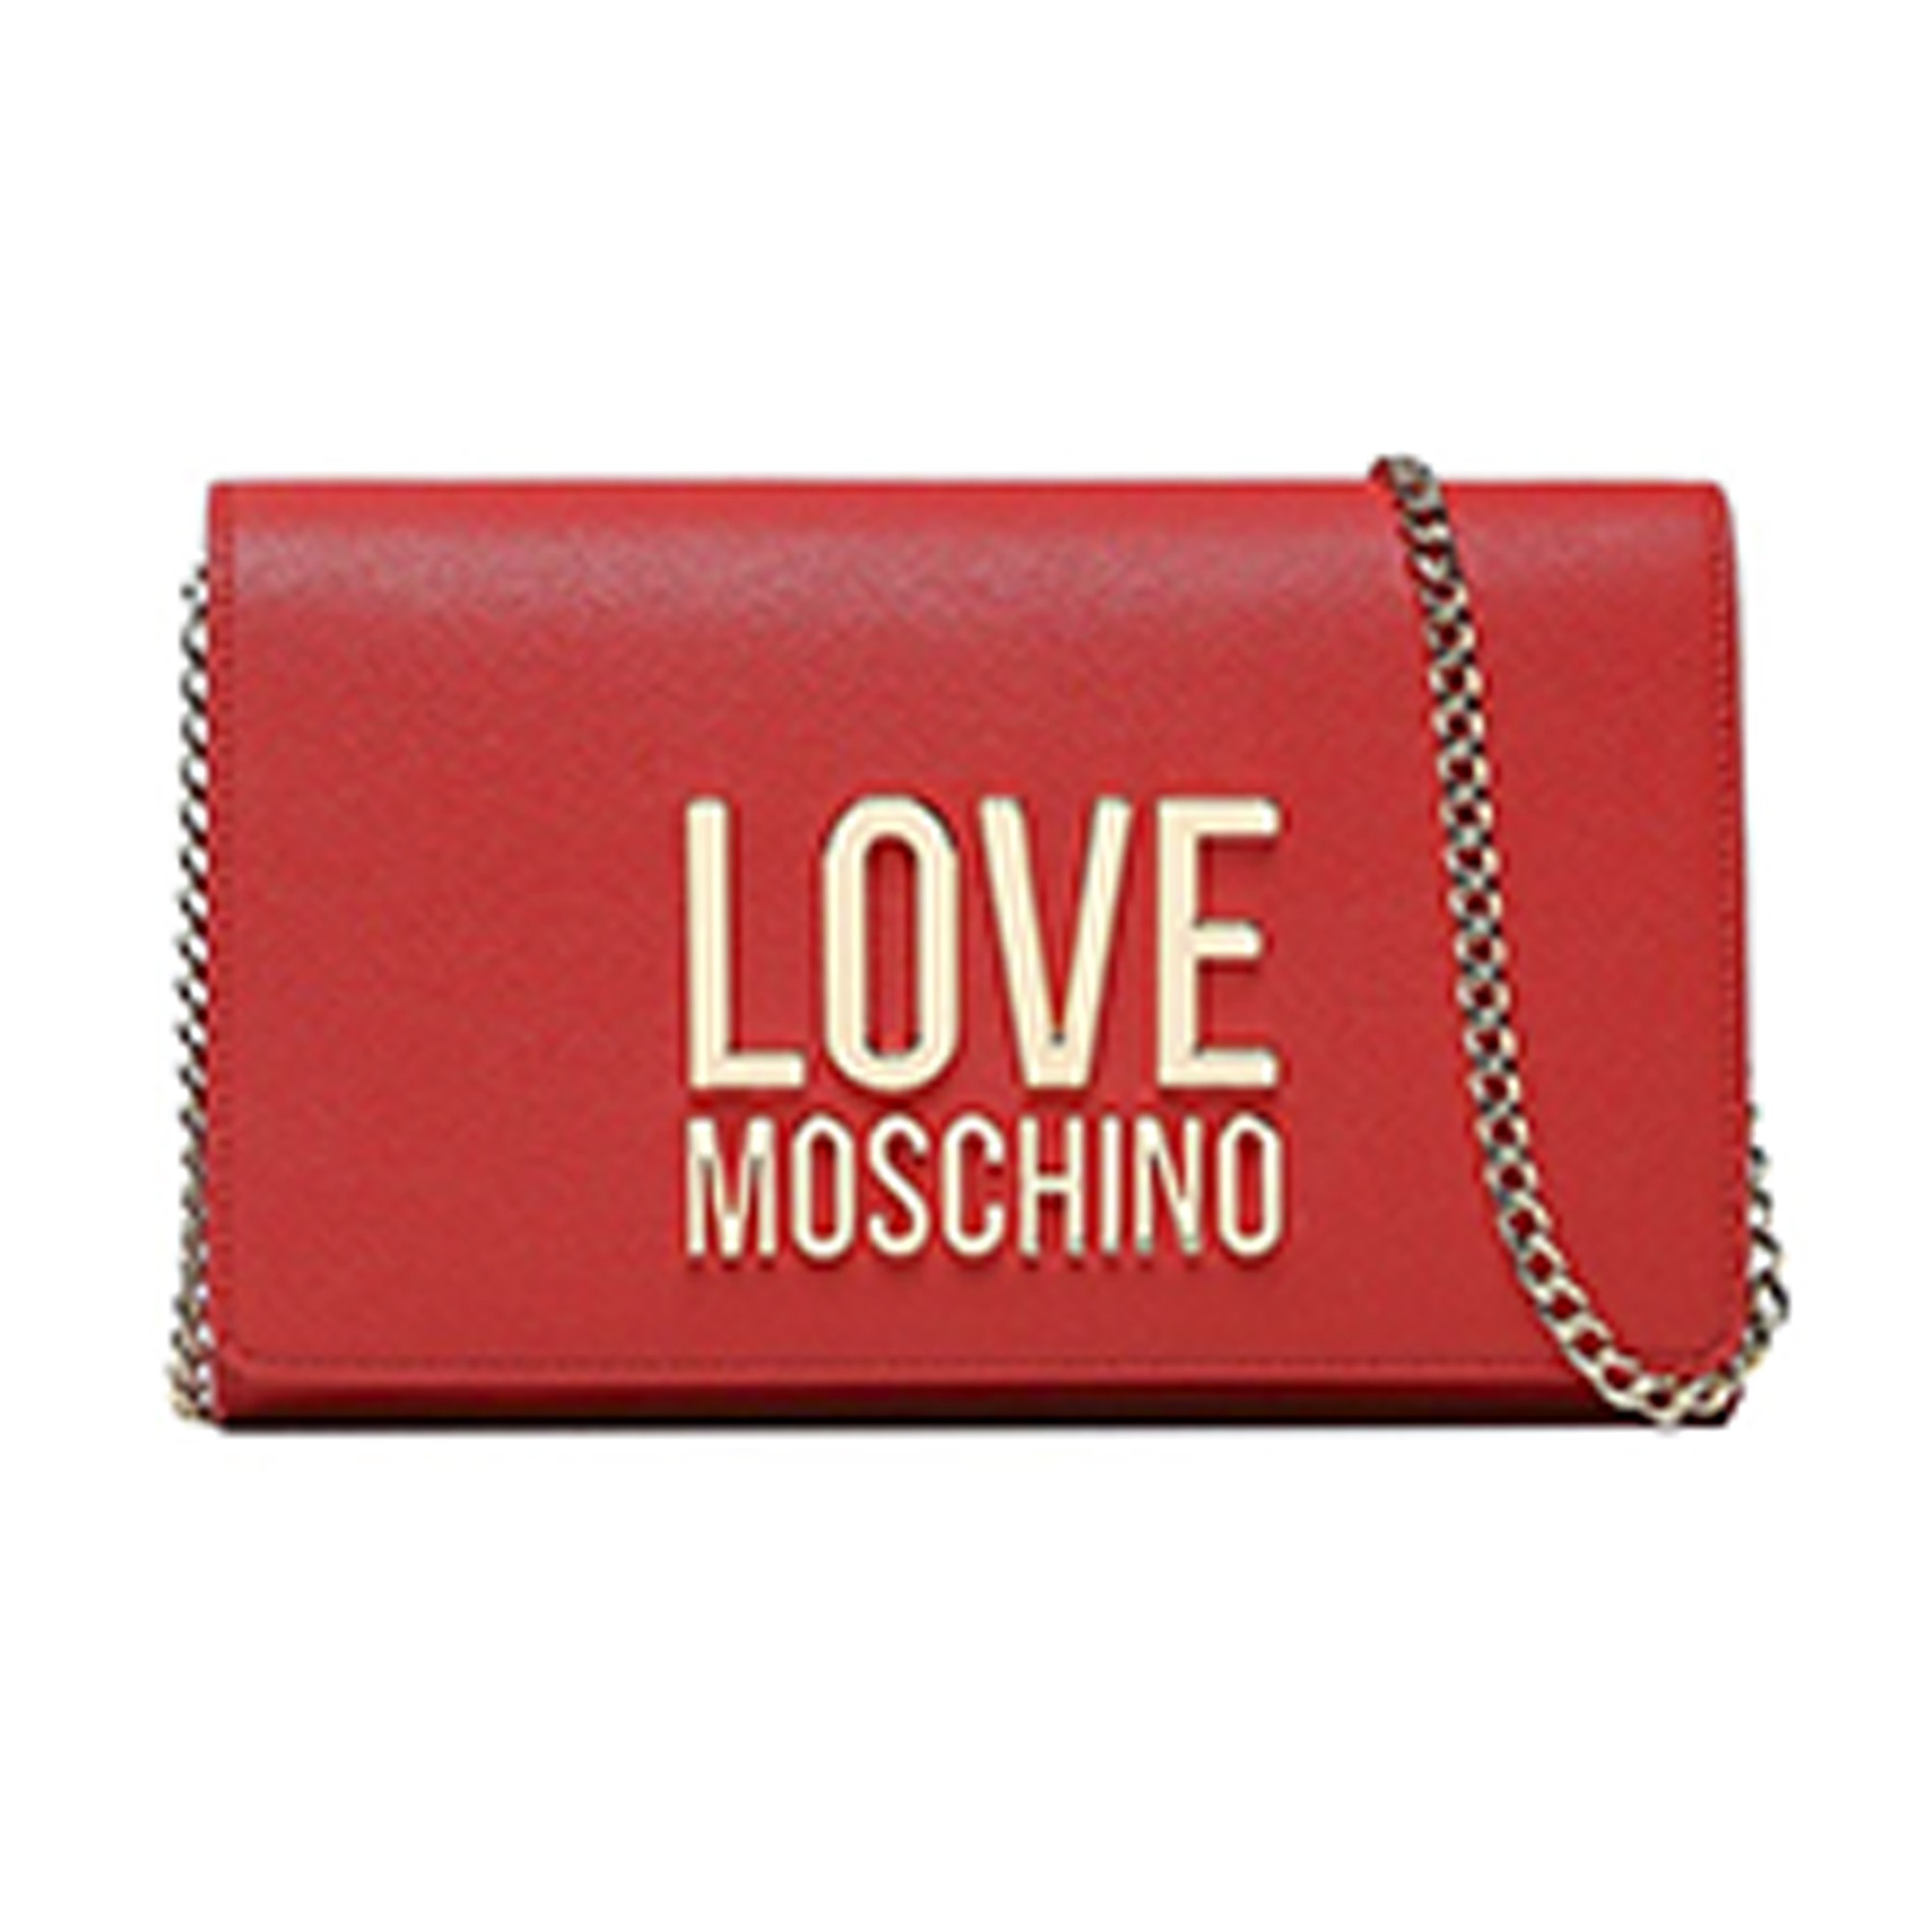 Moschino bags in velvet - ShopStyle